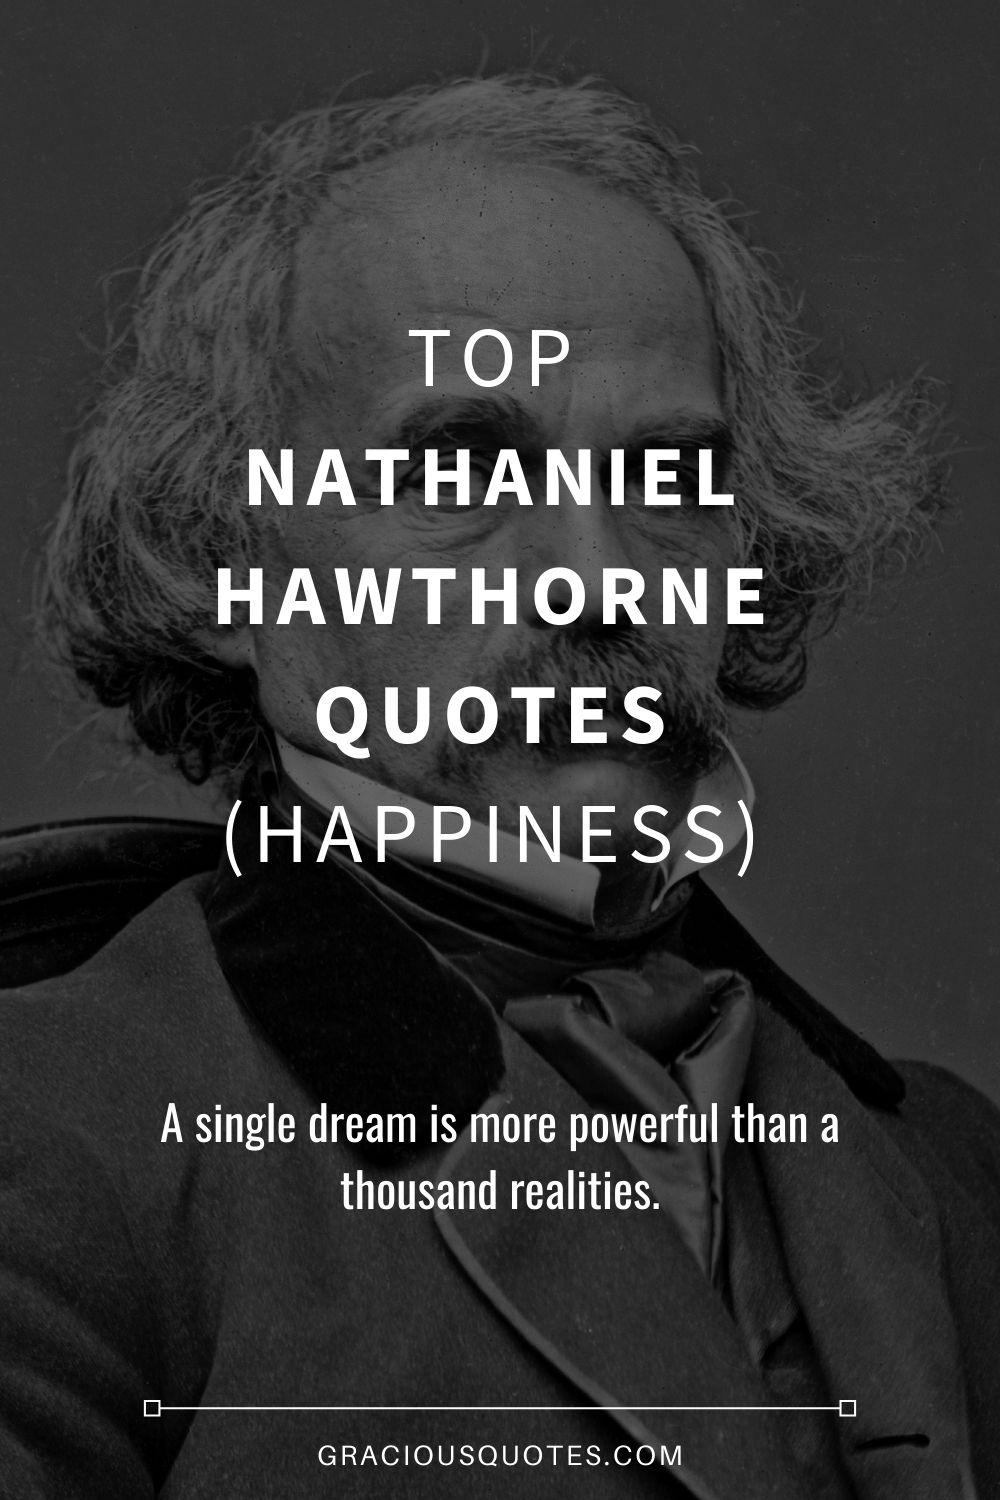 Top Nathaniel Hawthorne Quotes (HAPPINESS) - Gracious Quotes